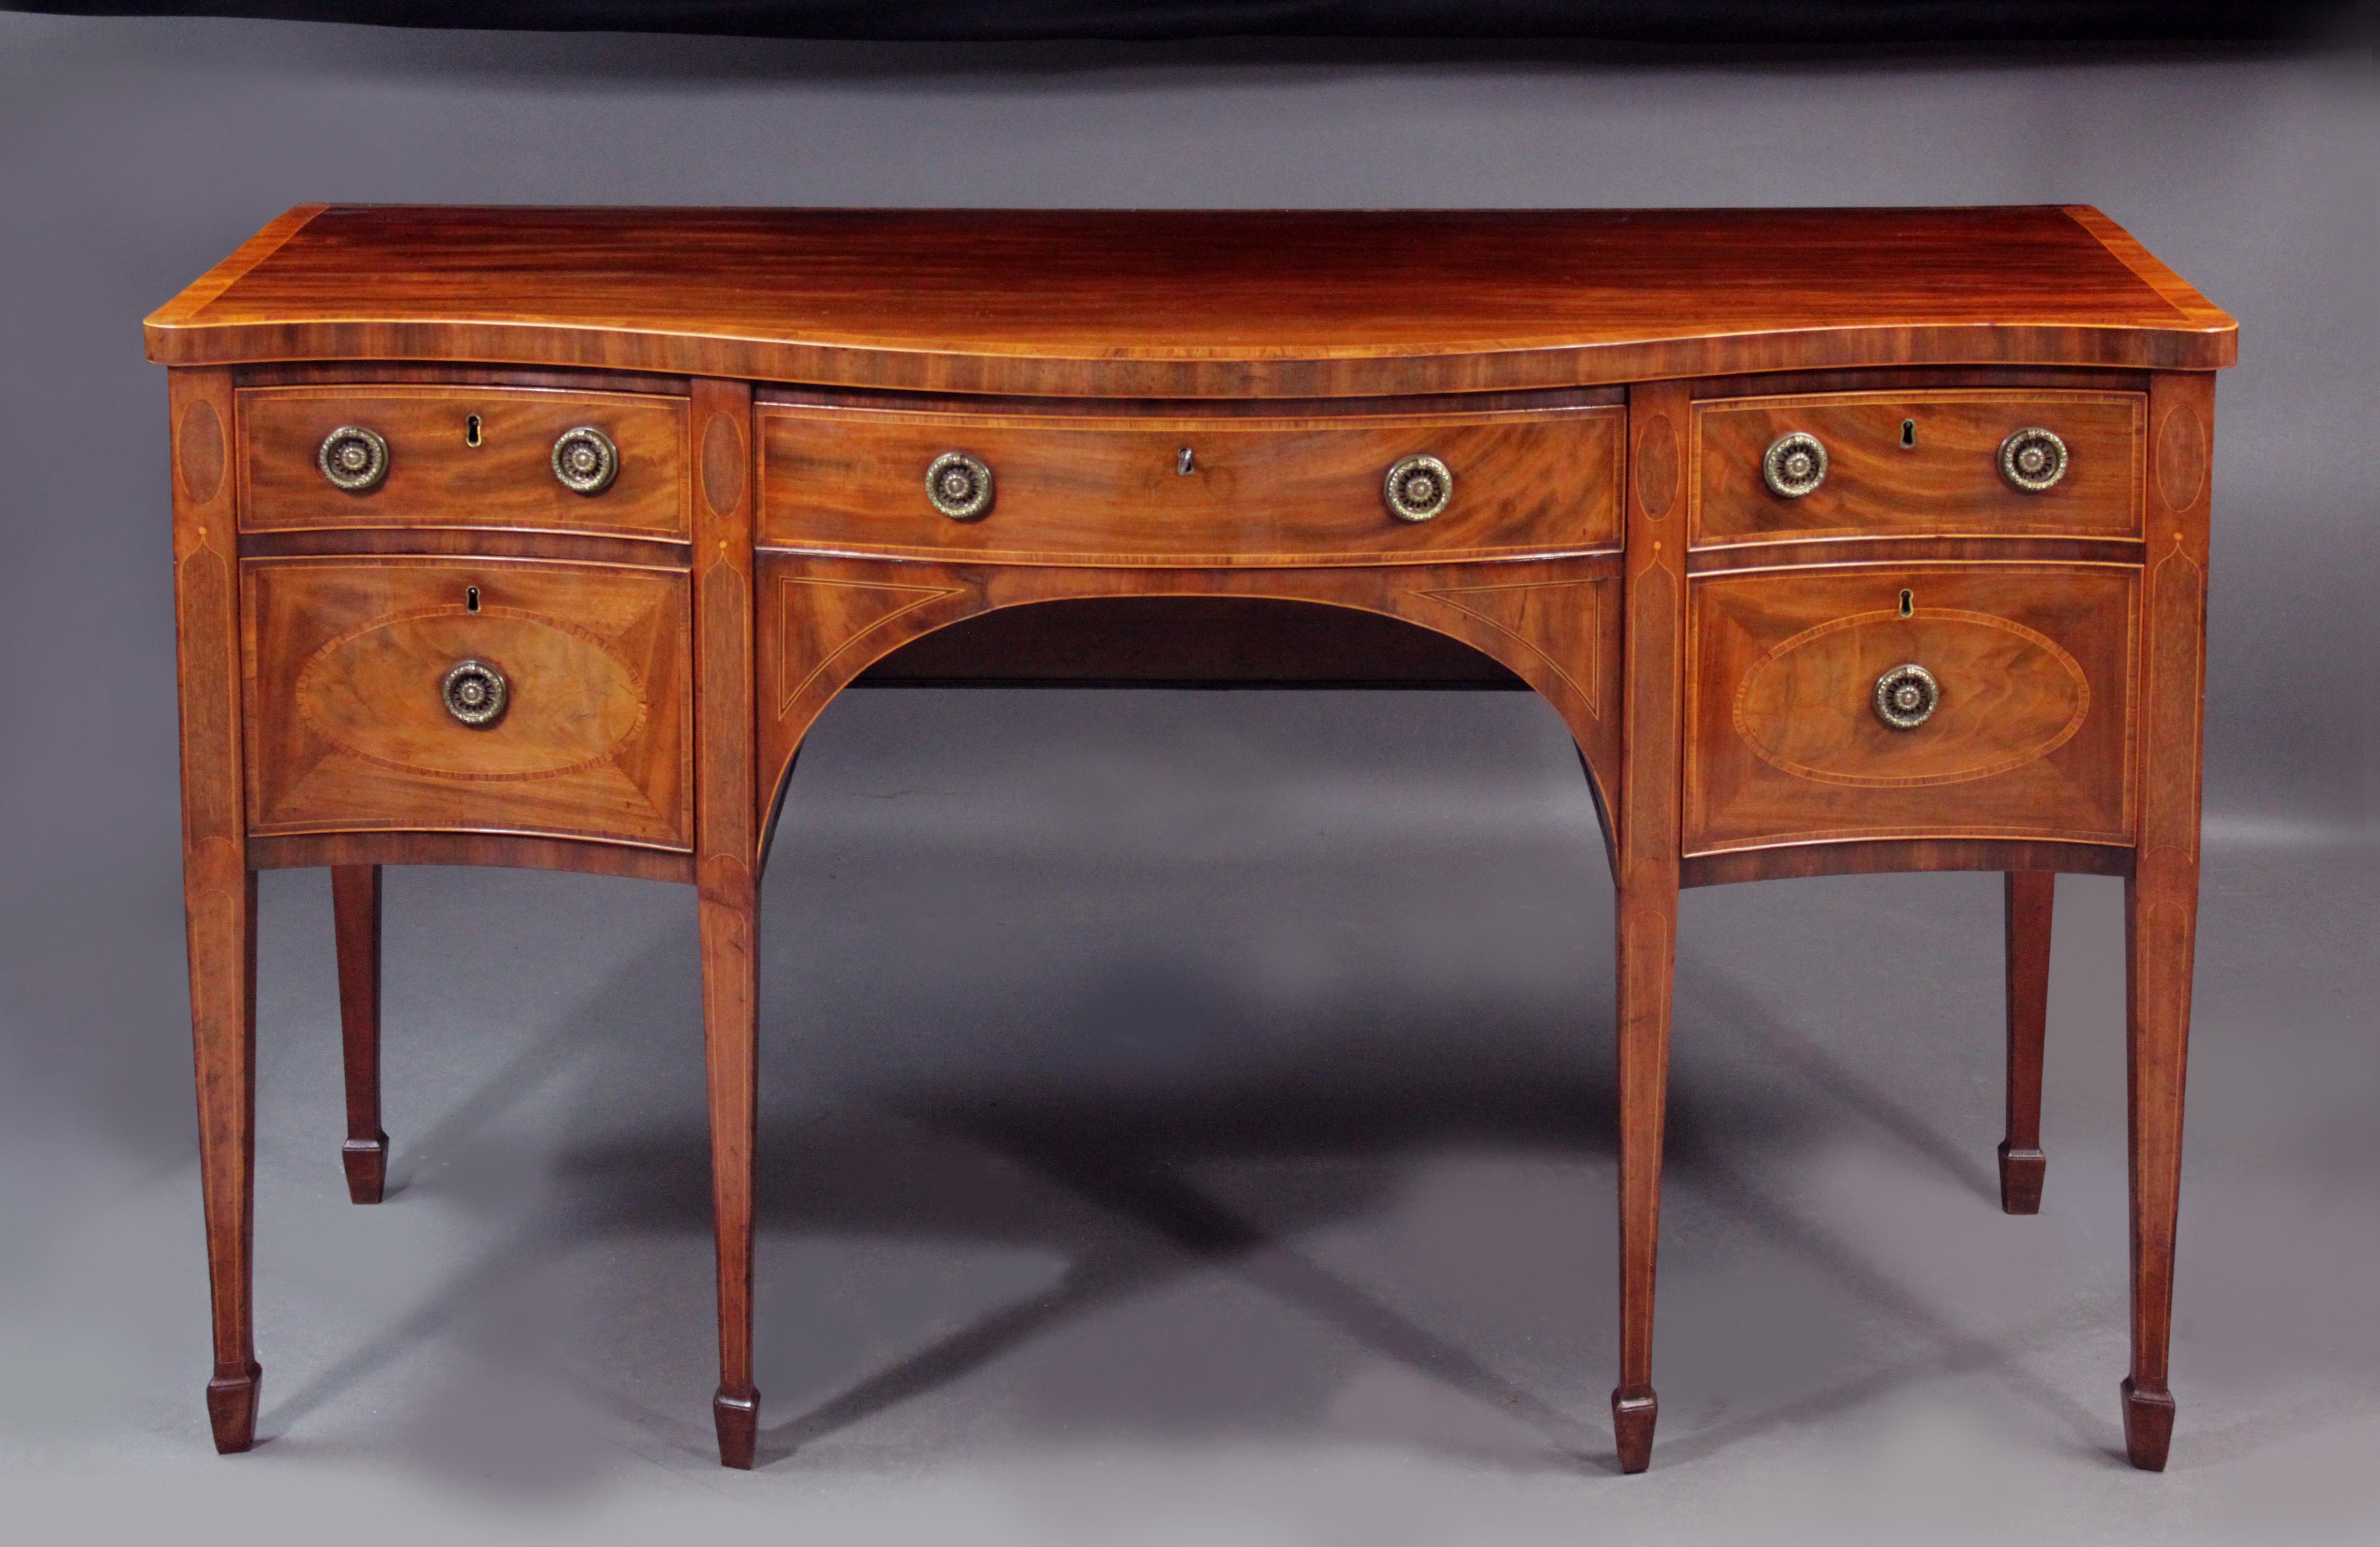 A fine quality George III serpentine sideboard in the manner of Thomas Sheraton: figured mahogany with tulip wood cross-banding and attractive inlays including ovals to the lower drawers and boxwood cock-beading which extend to the depth of the